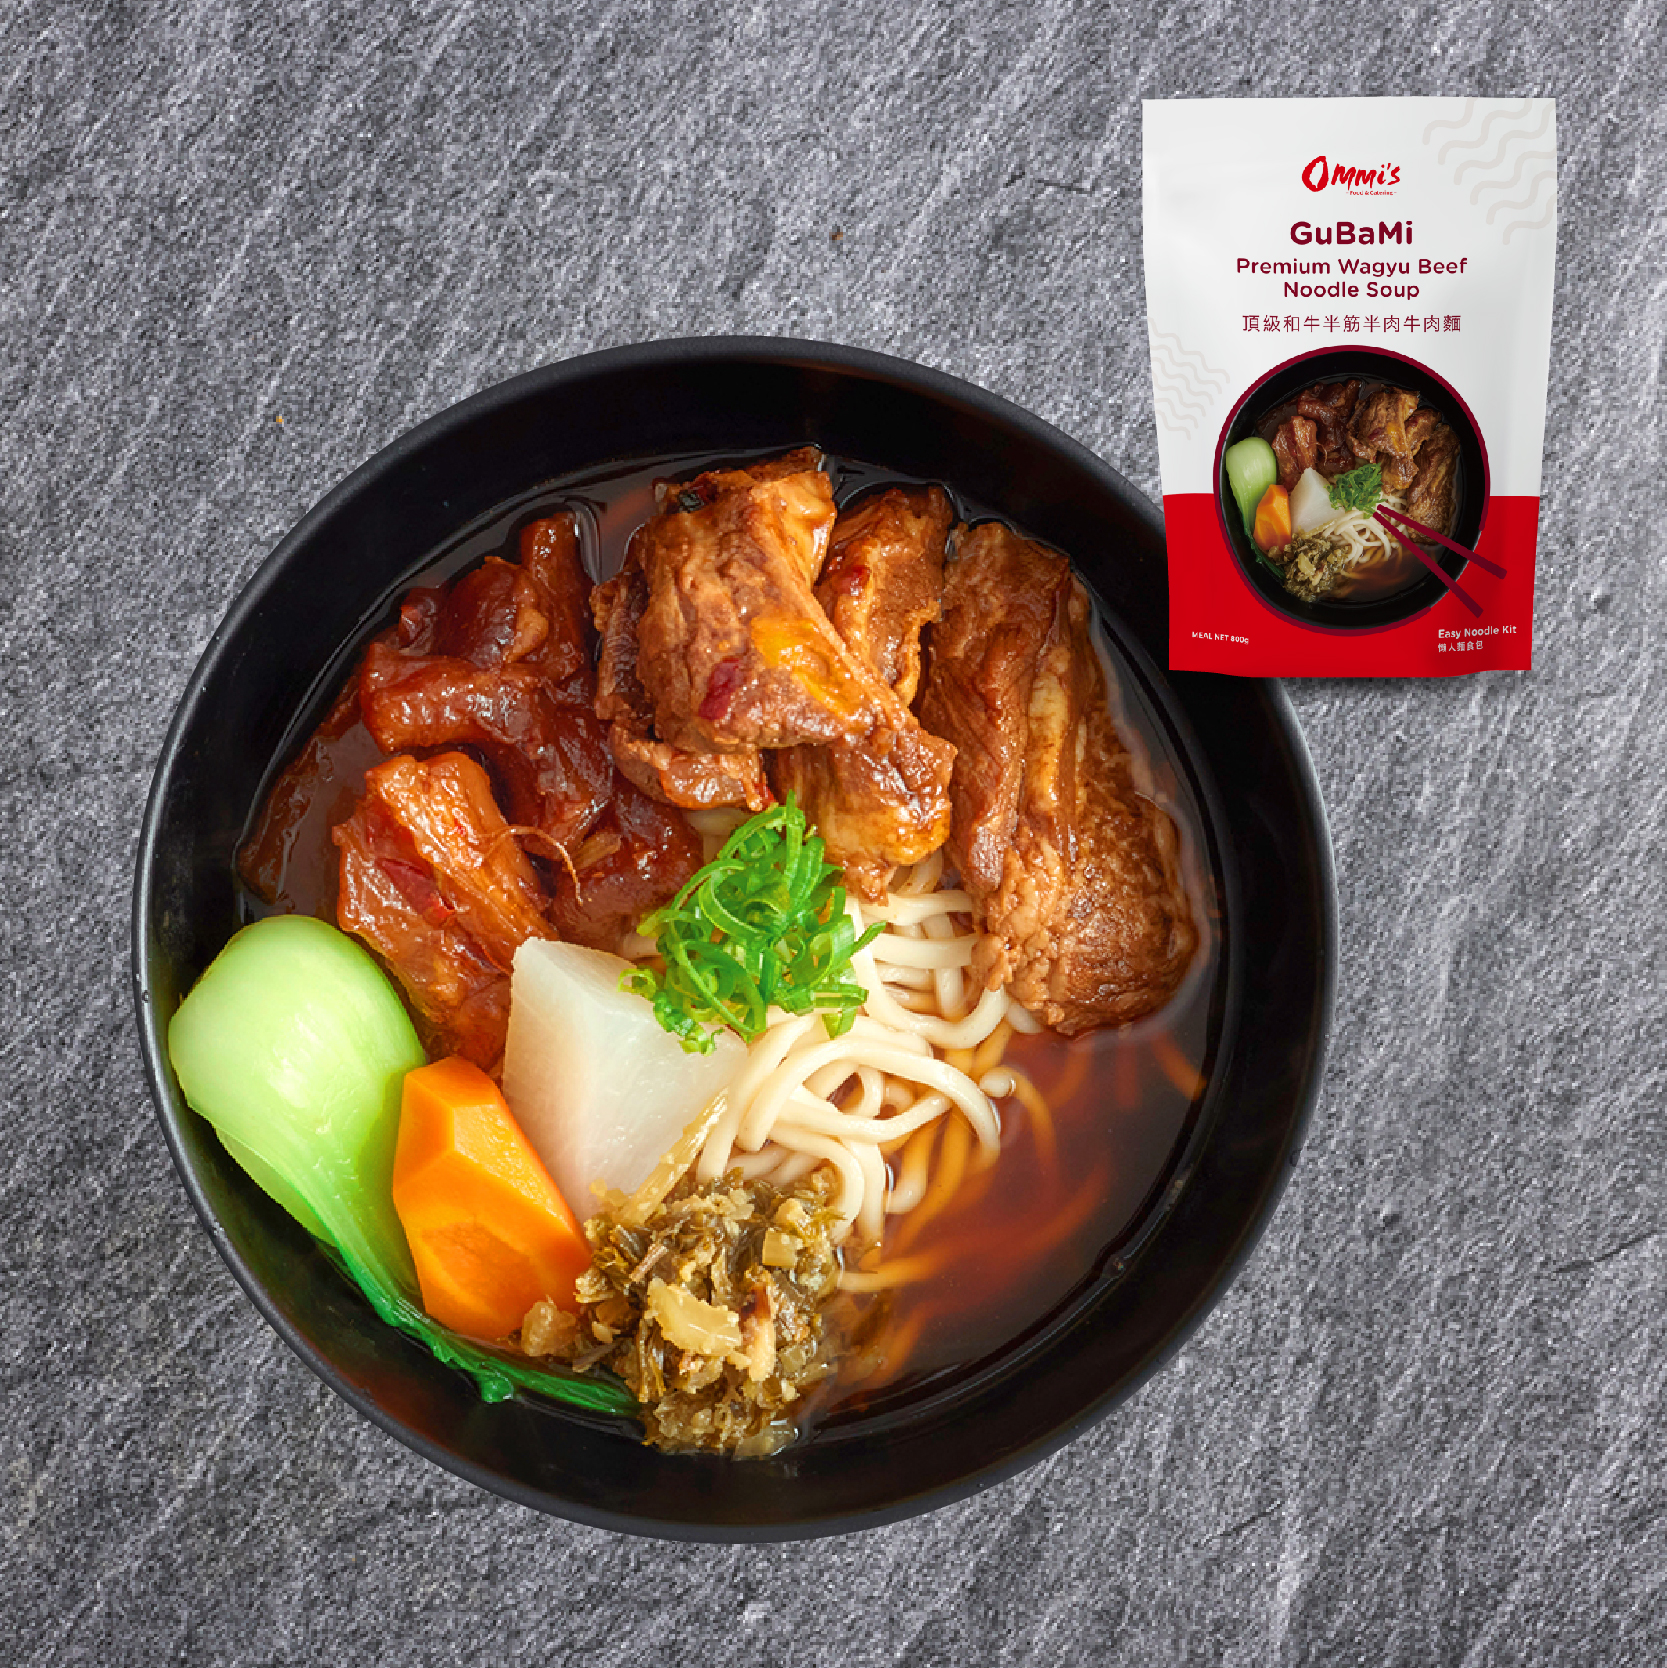 Ommi's Premium Wagyu Beef Noodle Soup 800g-eBest-Noodles,Ready Meal